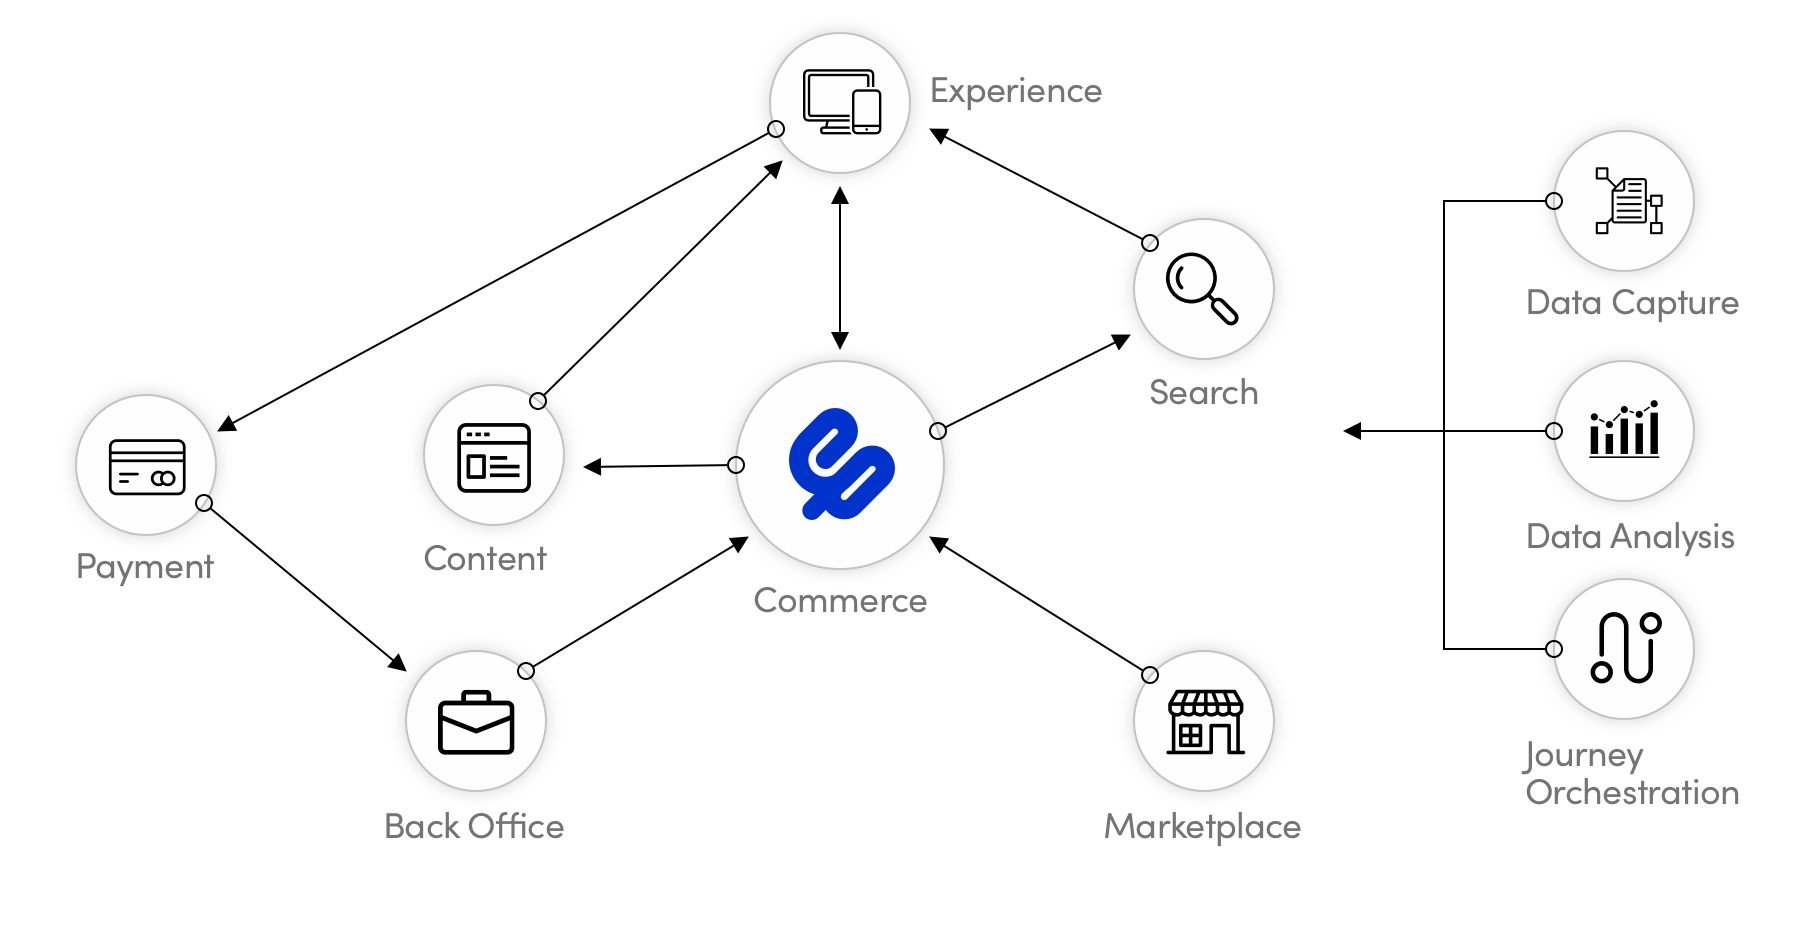 Simple architecture drawing made up of circles with arrows pointing from cricle to circle. The central node to the diagram is commerce, with arrows pointing to experience via content and search. A bi-directional arrow also connects commerce to experience. Experience also points back to commerce via payment into back office. Marketplace points to commerce as well. Outside of the main architecture group is data capture, data analysis, and journey orchesteration, collectively pointing at the rest of the diagram as a whole. Each node has a corresponding icon, with the exception of commerce which contains the Elastic Path logo.